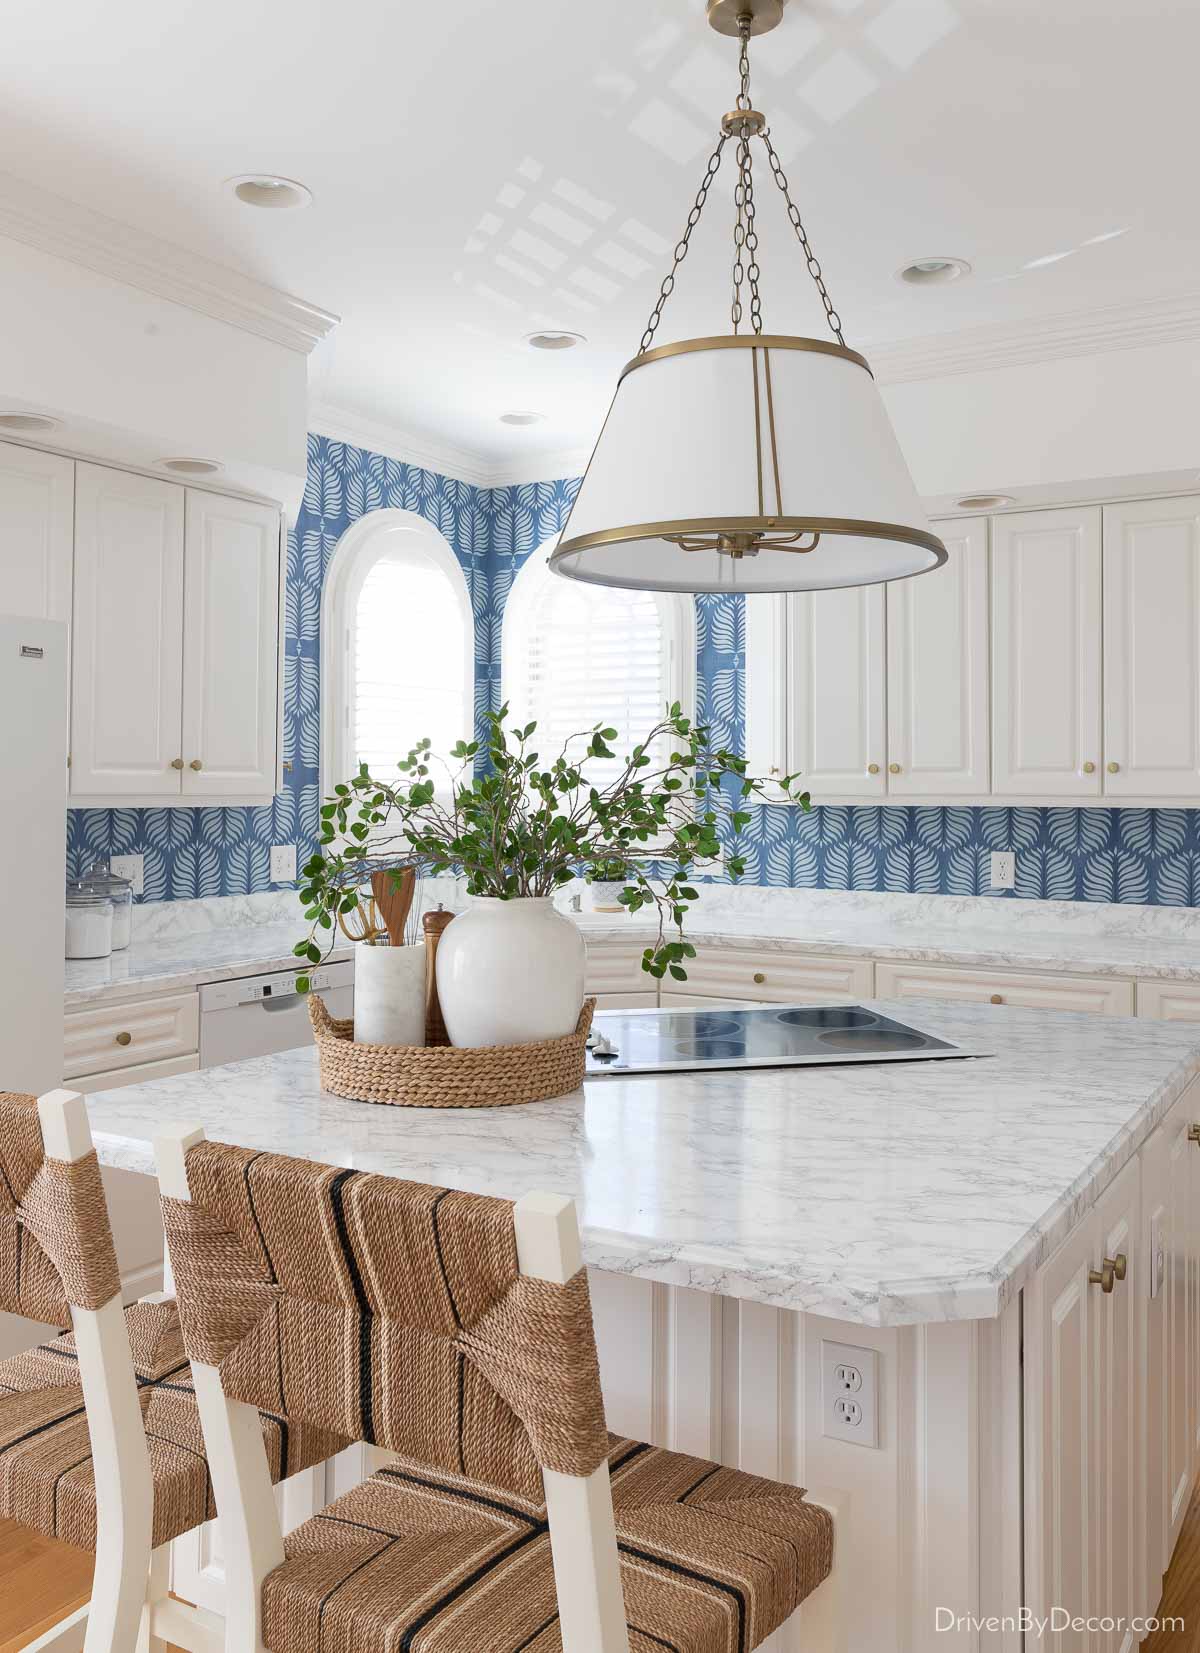 A Wallpaper Backsplash For Your Kitchen   Driven by Decor